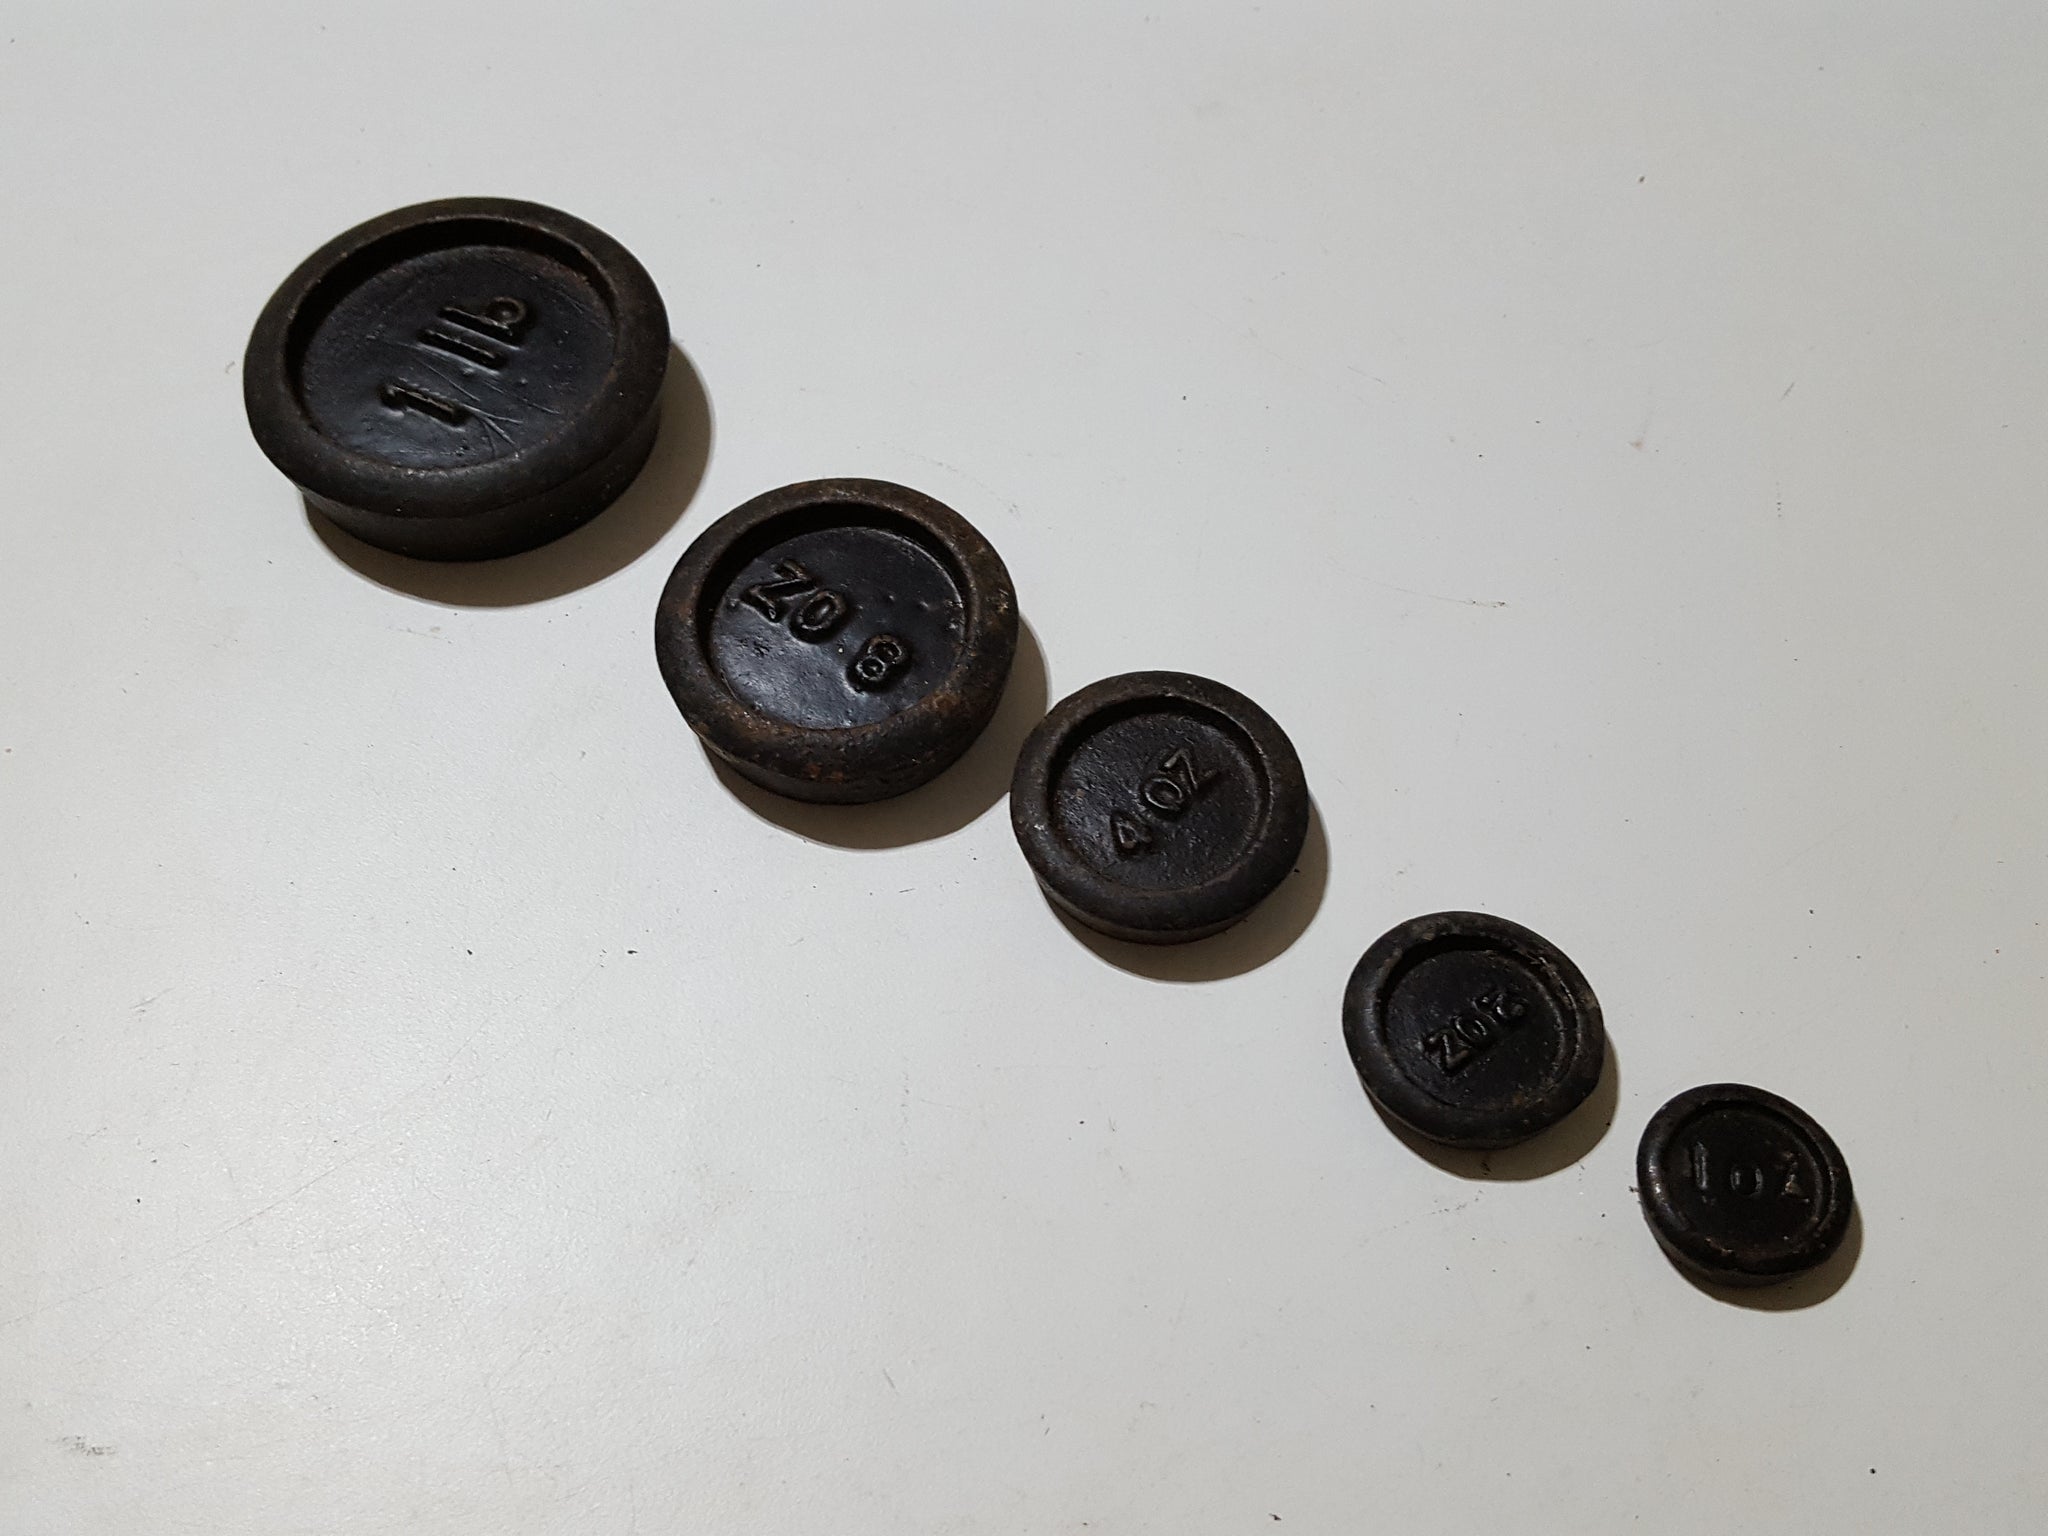 Set of 5 Small Weights 1oz - 1lb 33730